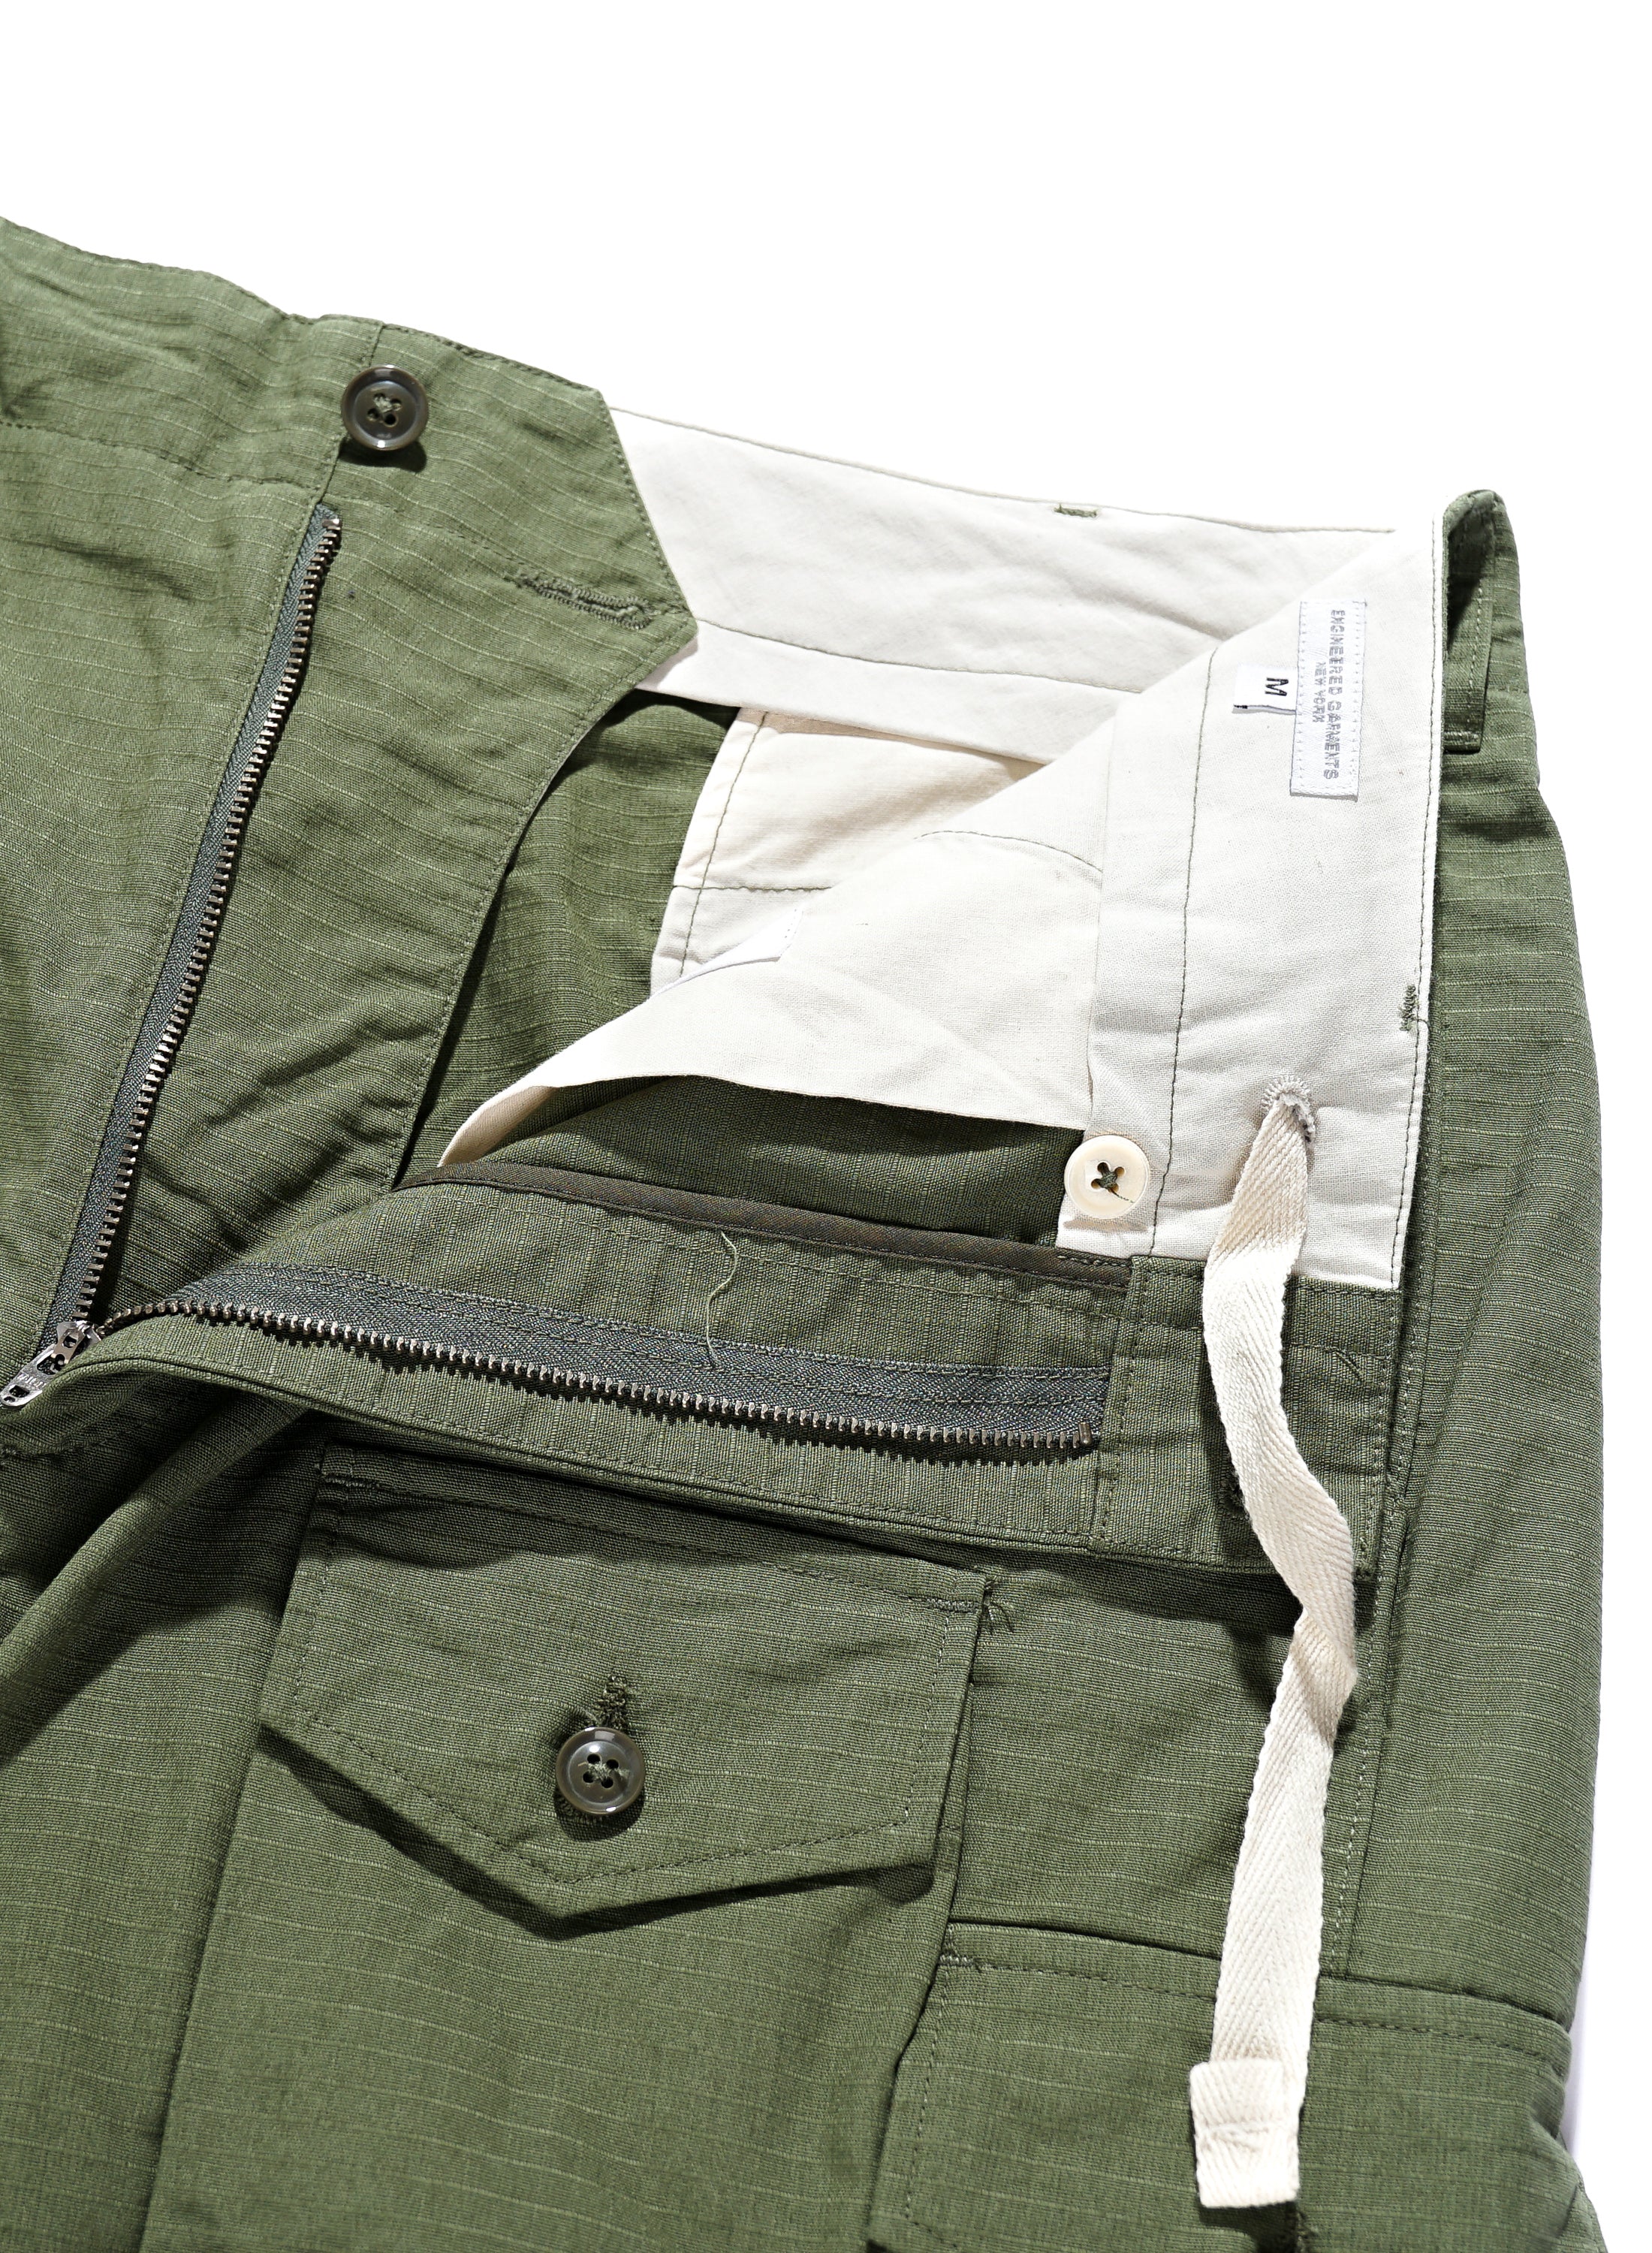 BDU 3/4 Shorts BEAMS Plus - Olive Cotton Ripstop | Nepenthes New York